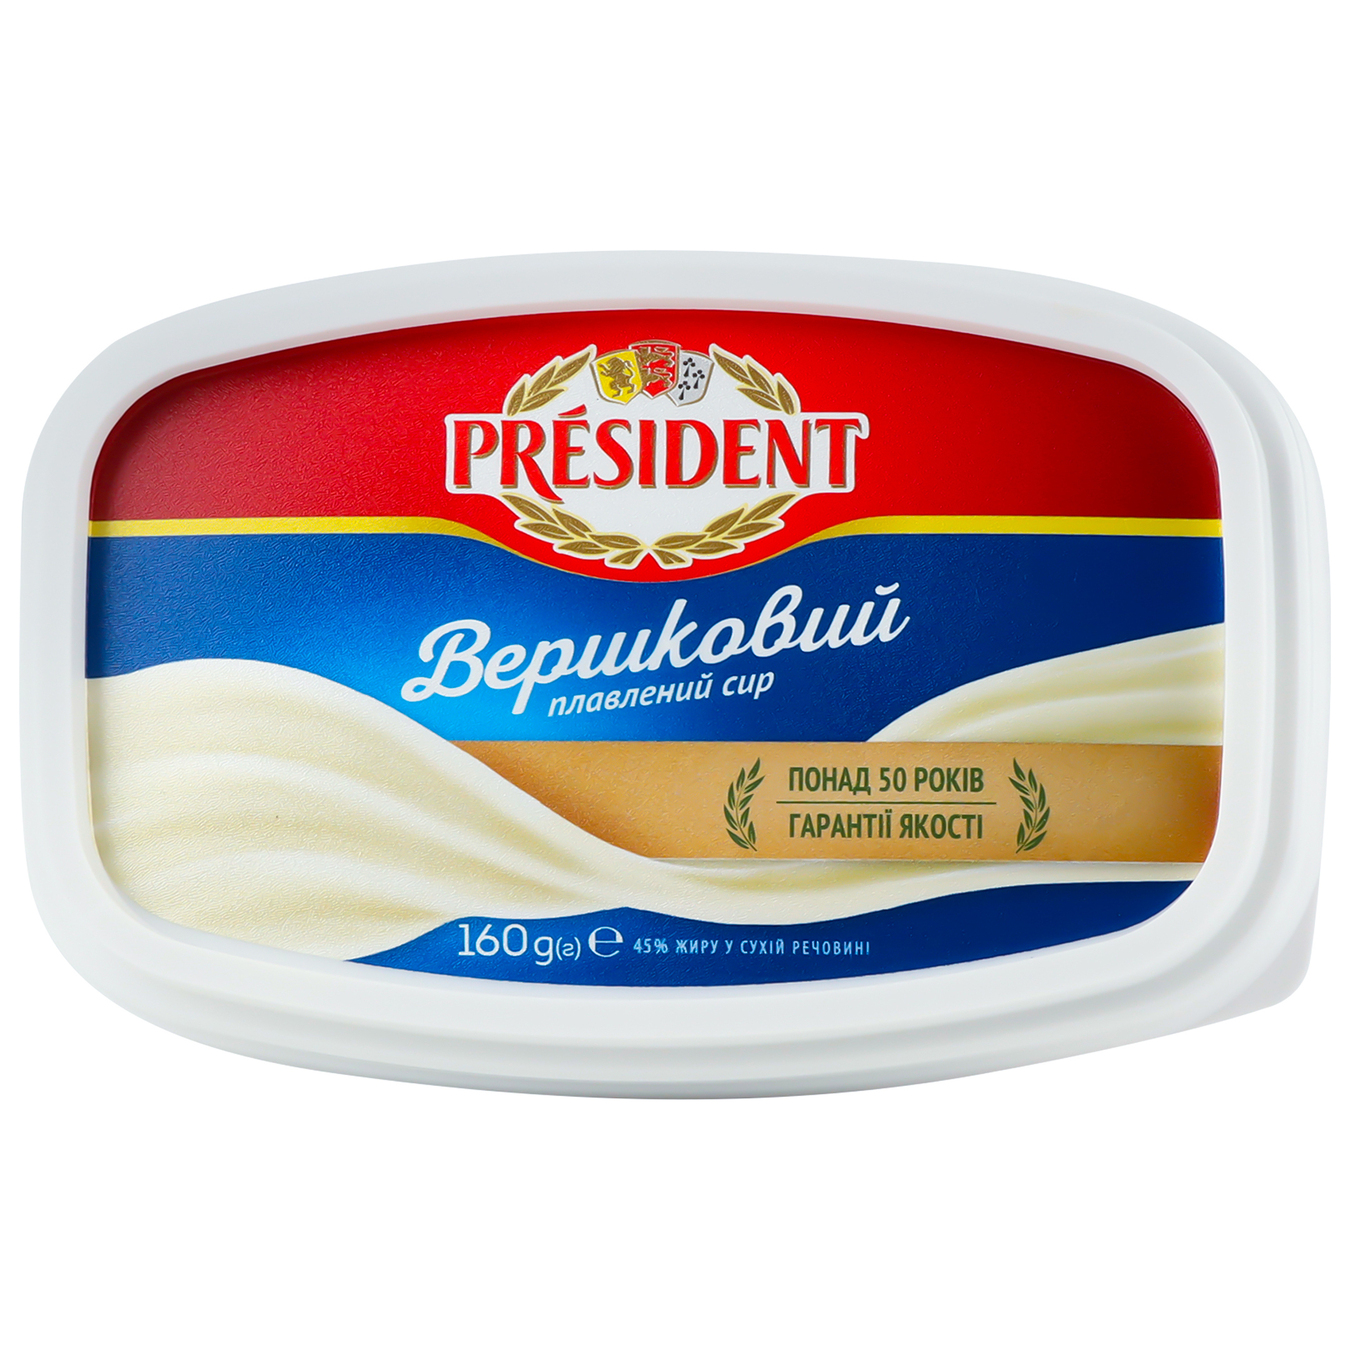 President processed cheese Creamy 45% 160g 5